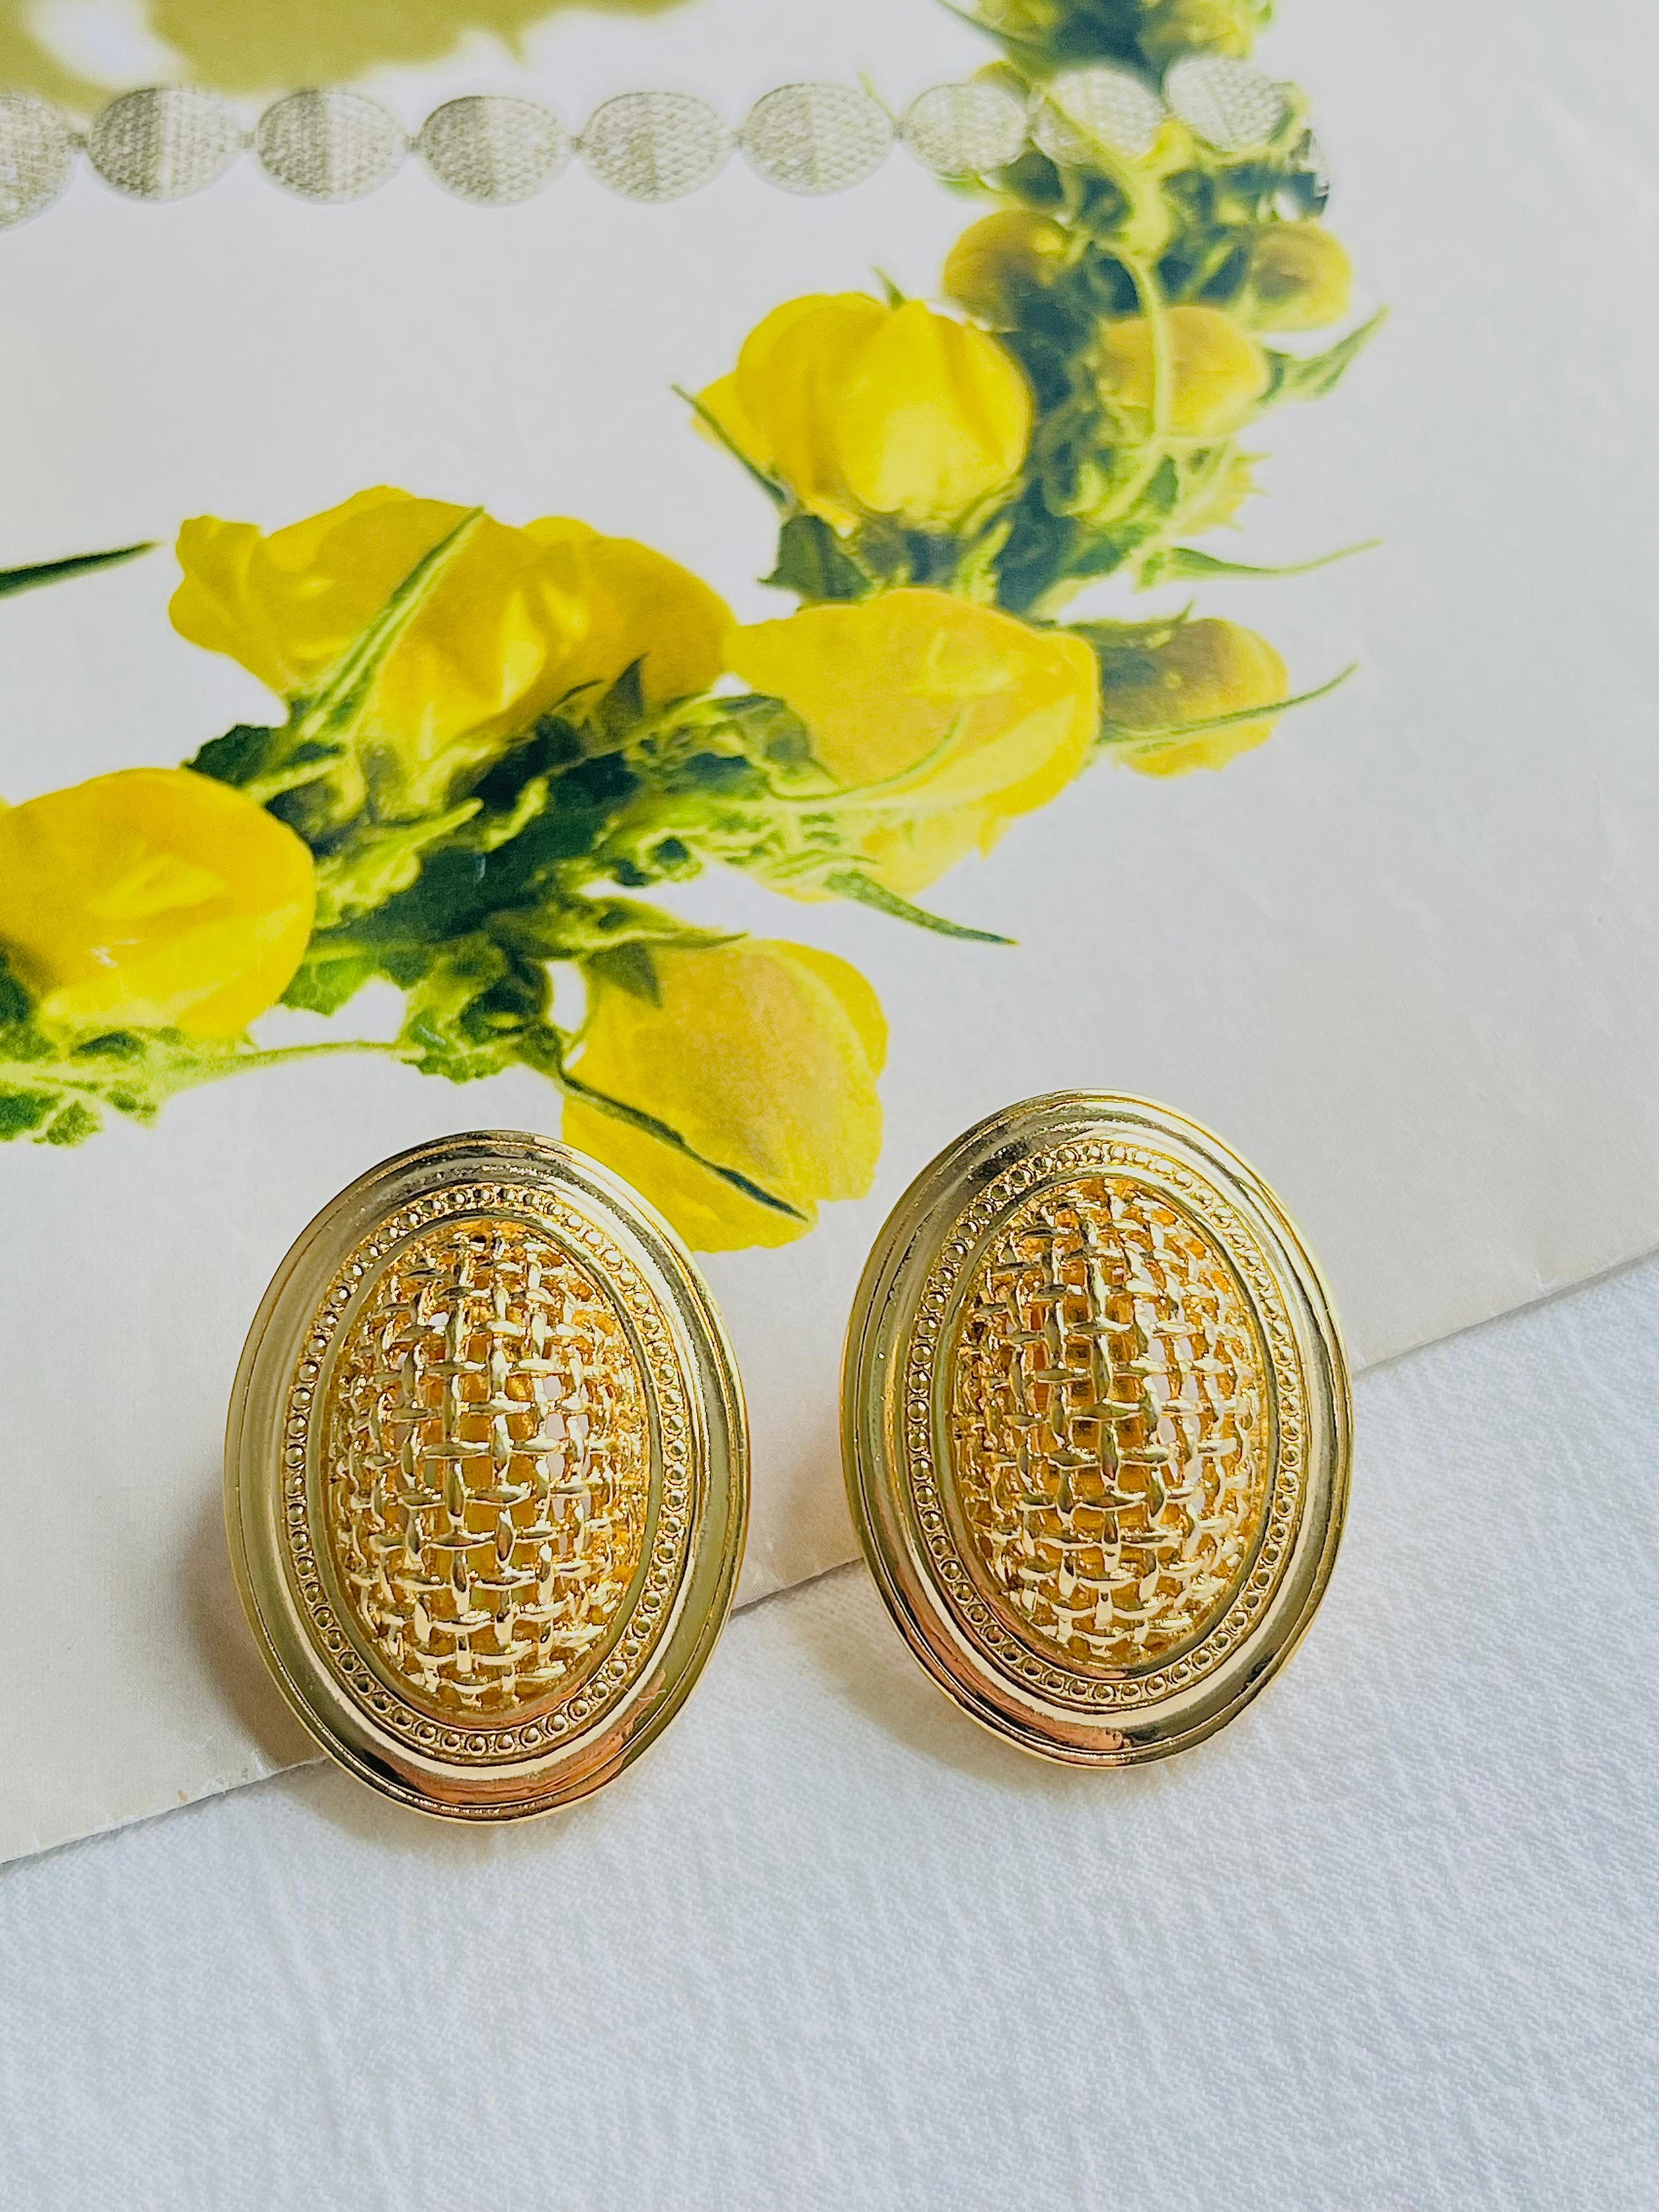 Christian Dior Vintage Large 3D Arch Oval Openwork Mesh Statement Modernist Clip Earrings, Gold Tone

Very good condition. Very light scratches or colour loss, barely noticeable. 100% Genuine.

Signed at the back. Rare to find.

Size: 3.7*2.7